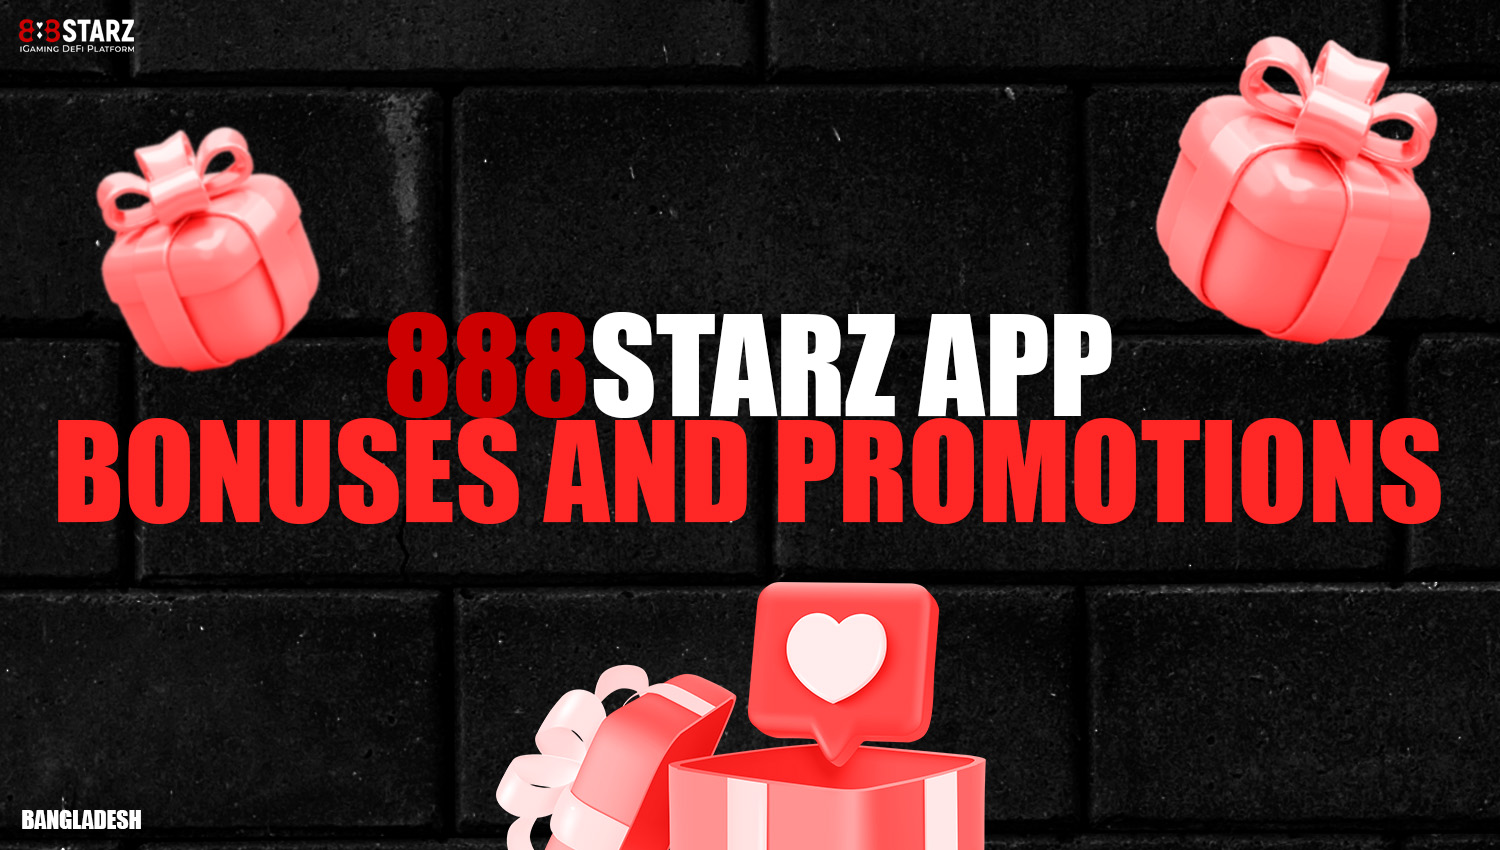 Bonuses and promo codes for 888starz users